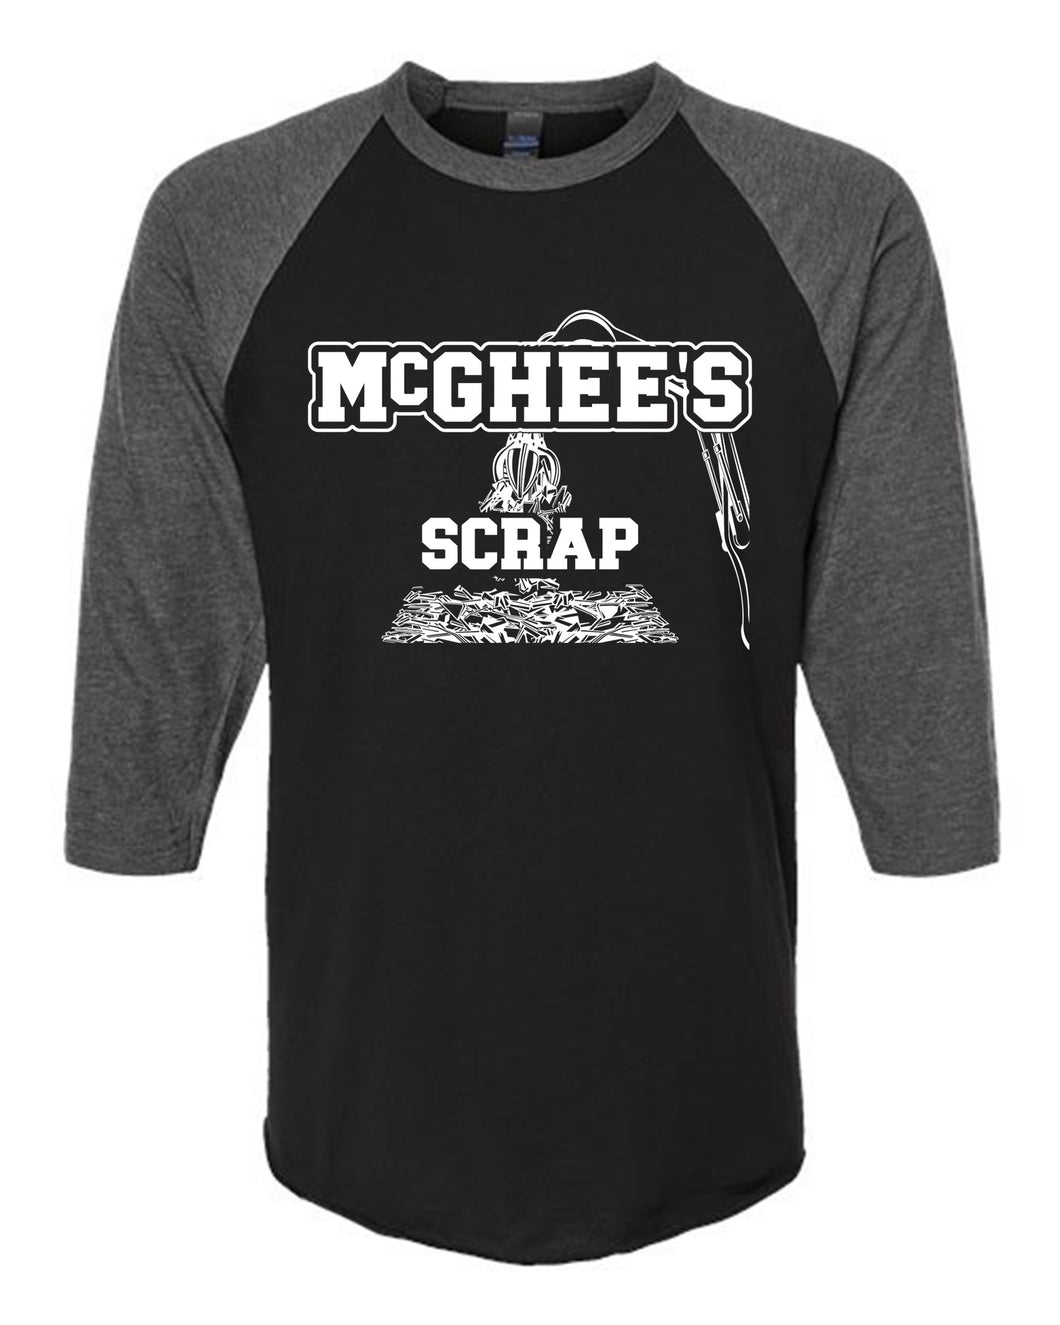 McGhee's Scrap 3/4 Sleeve (Adult Sizes Only)